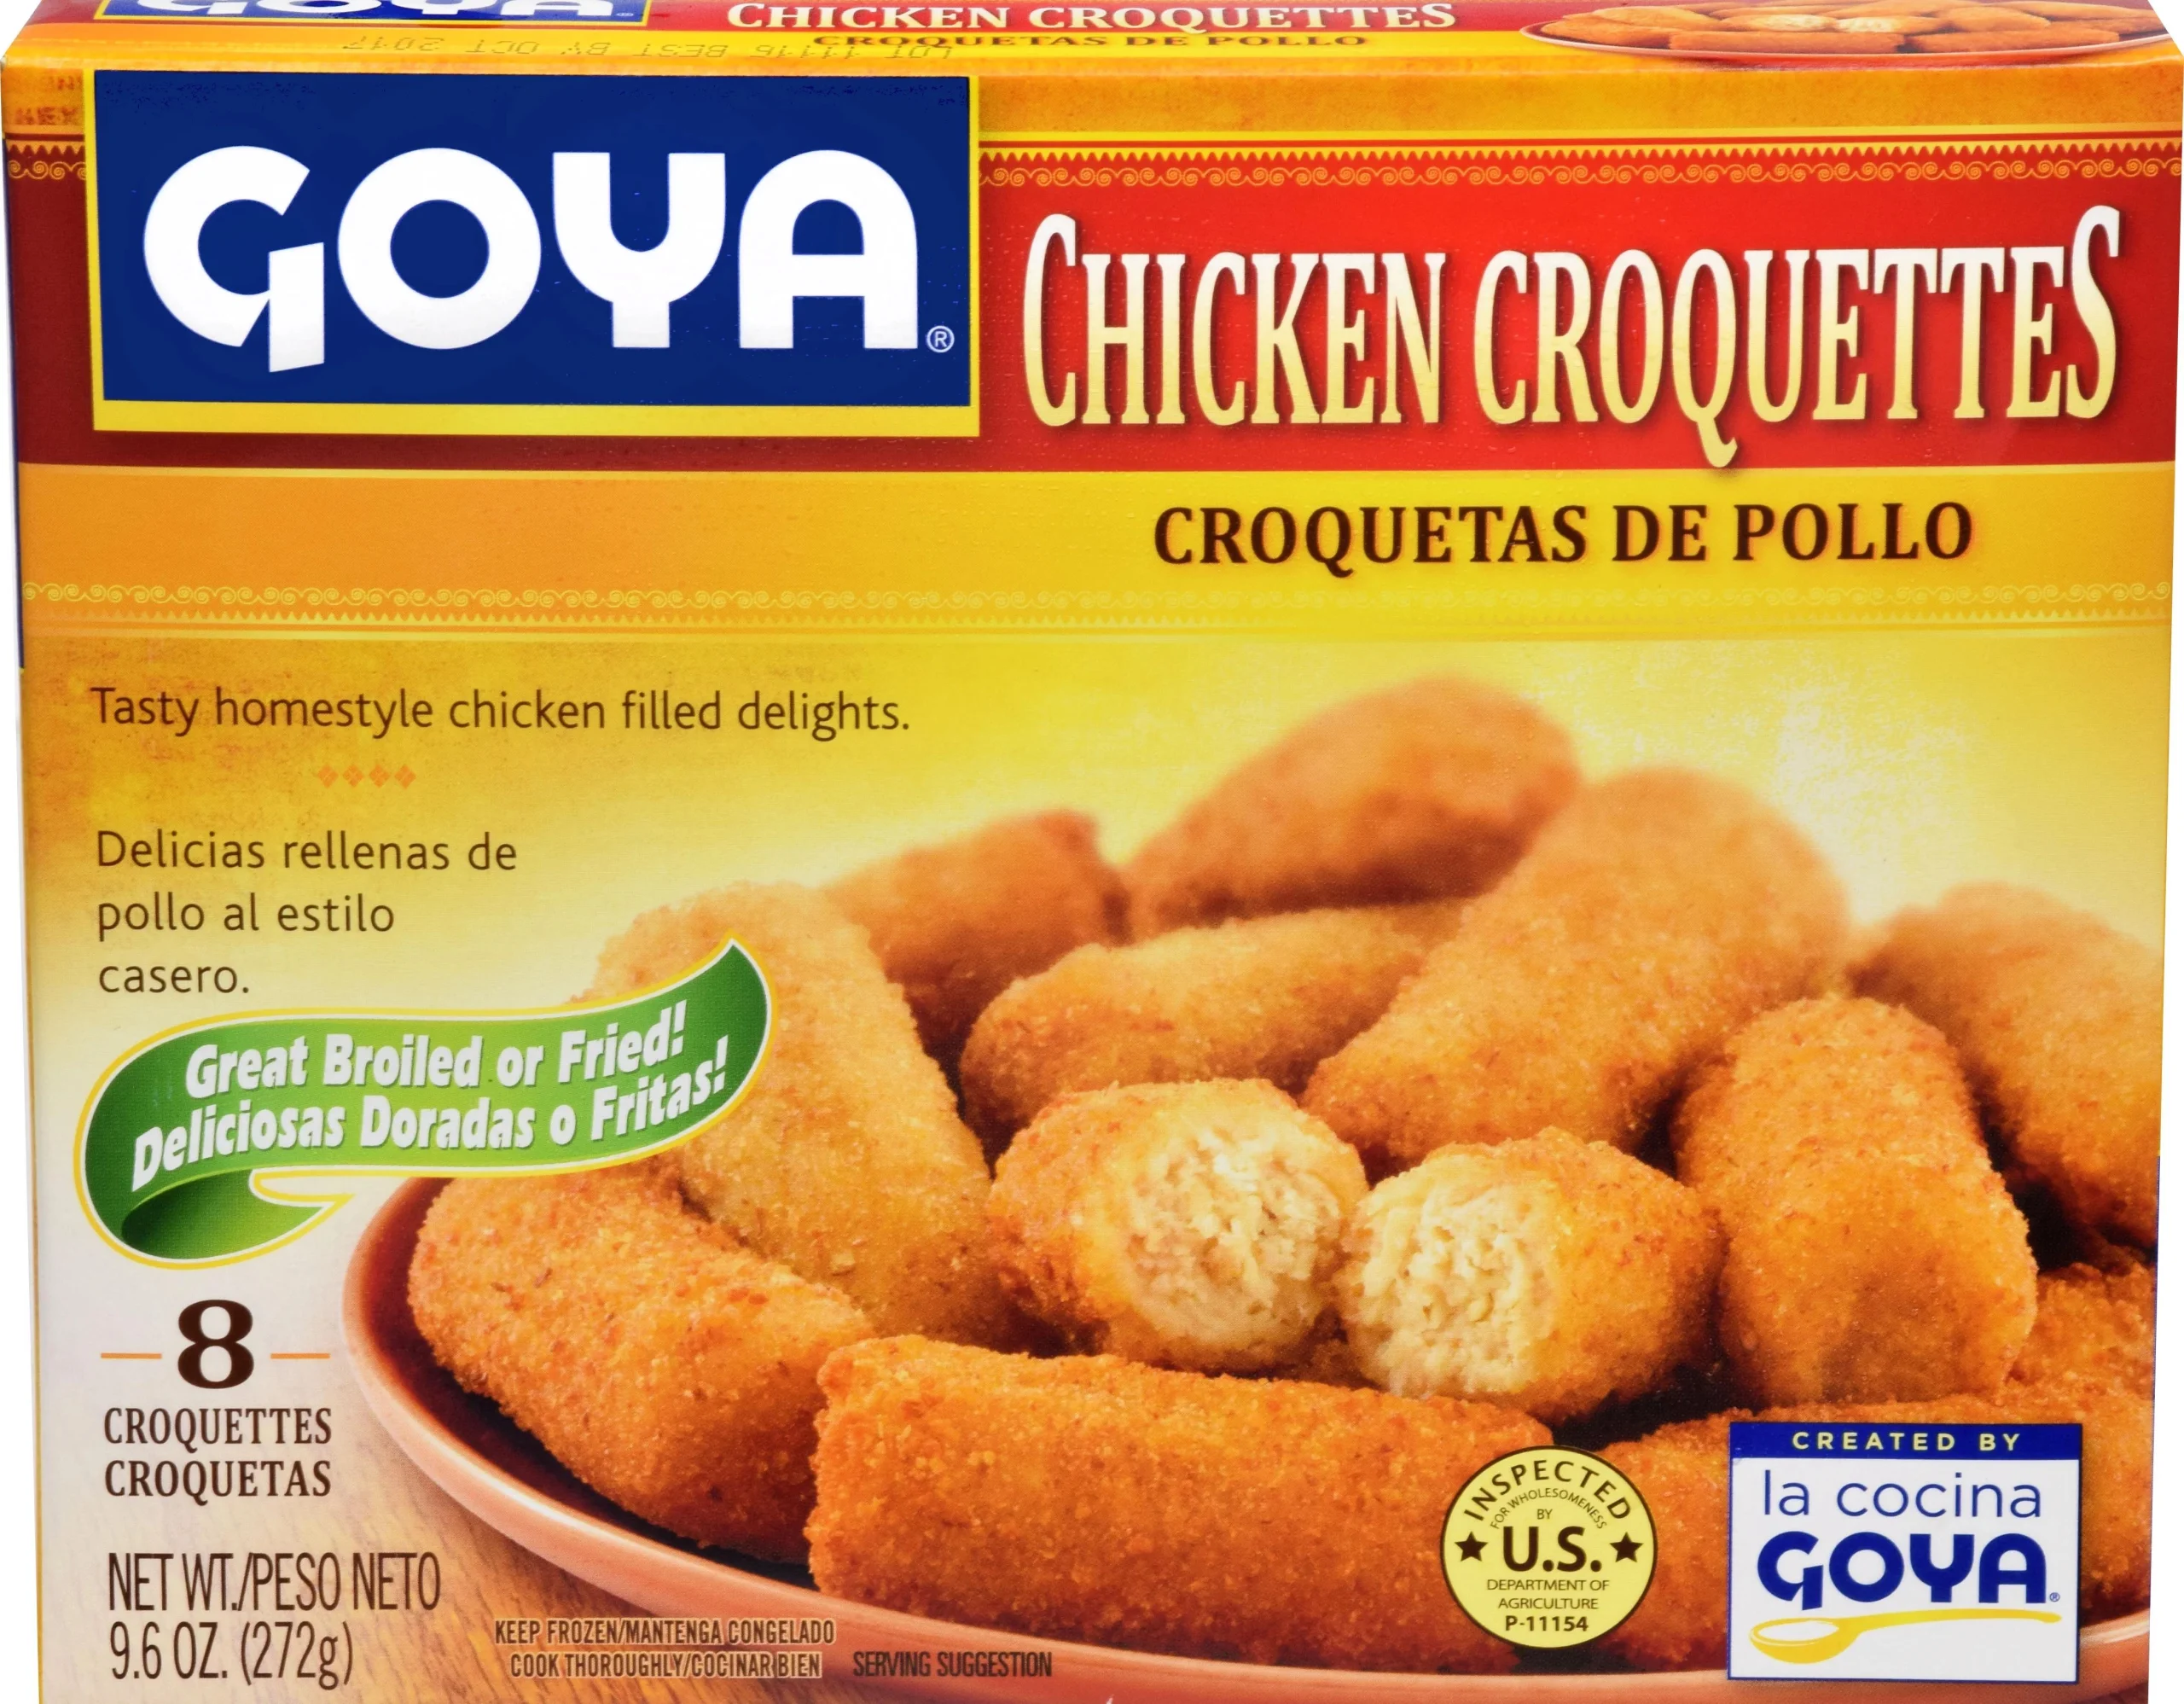 smoked chicken croquettes - Can you get frozen chicken croquettes